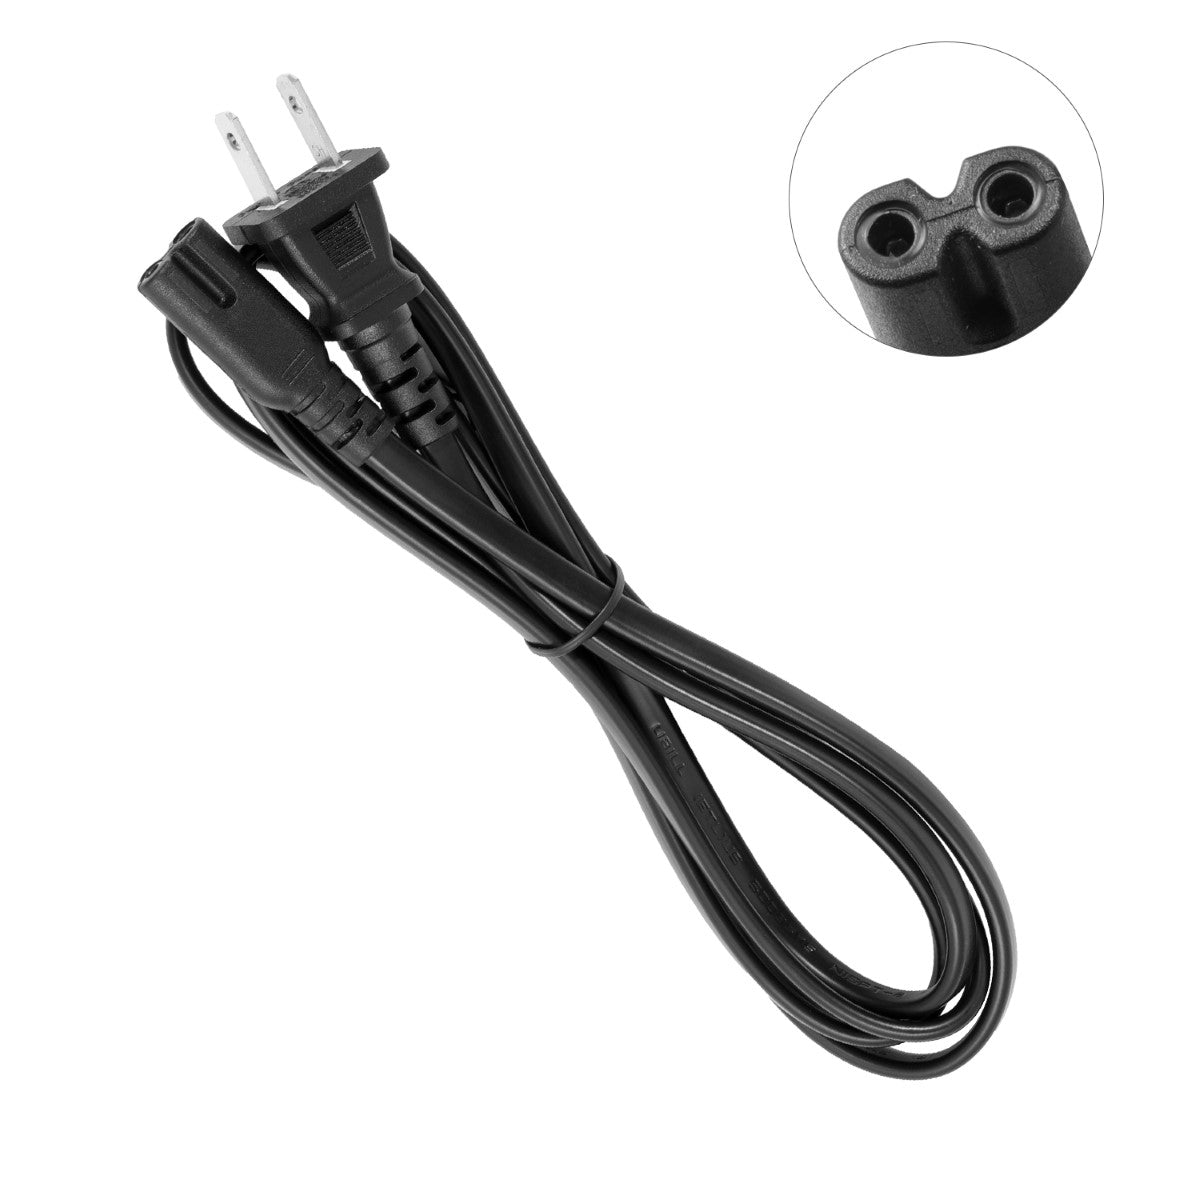 Power Cord for Canon MG5700 Series Wireless Printer.